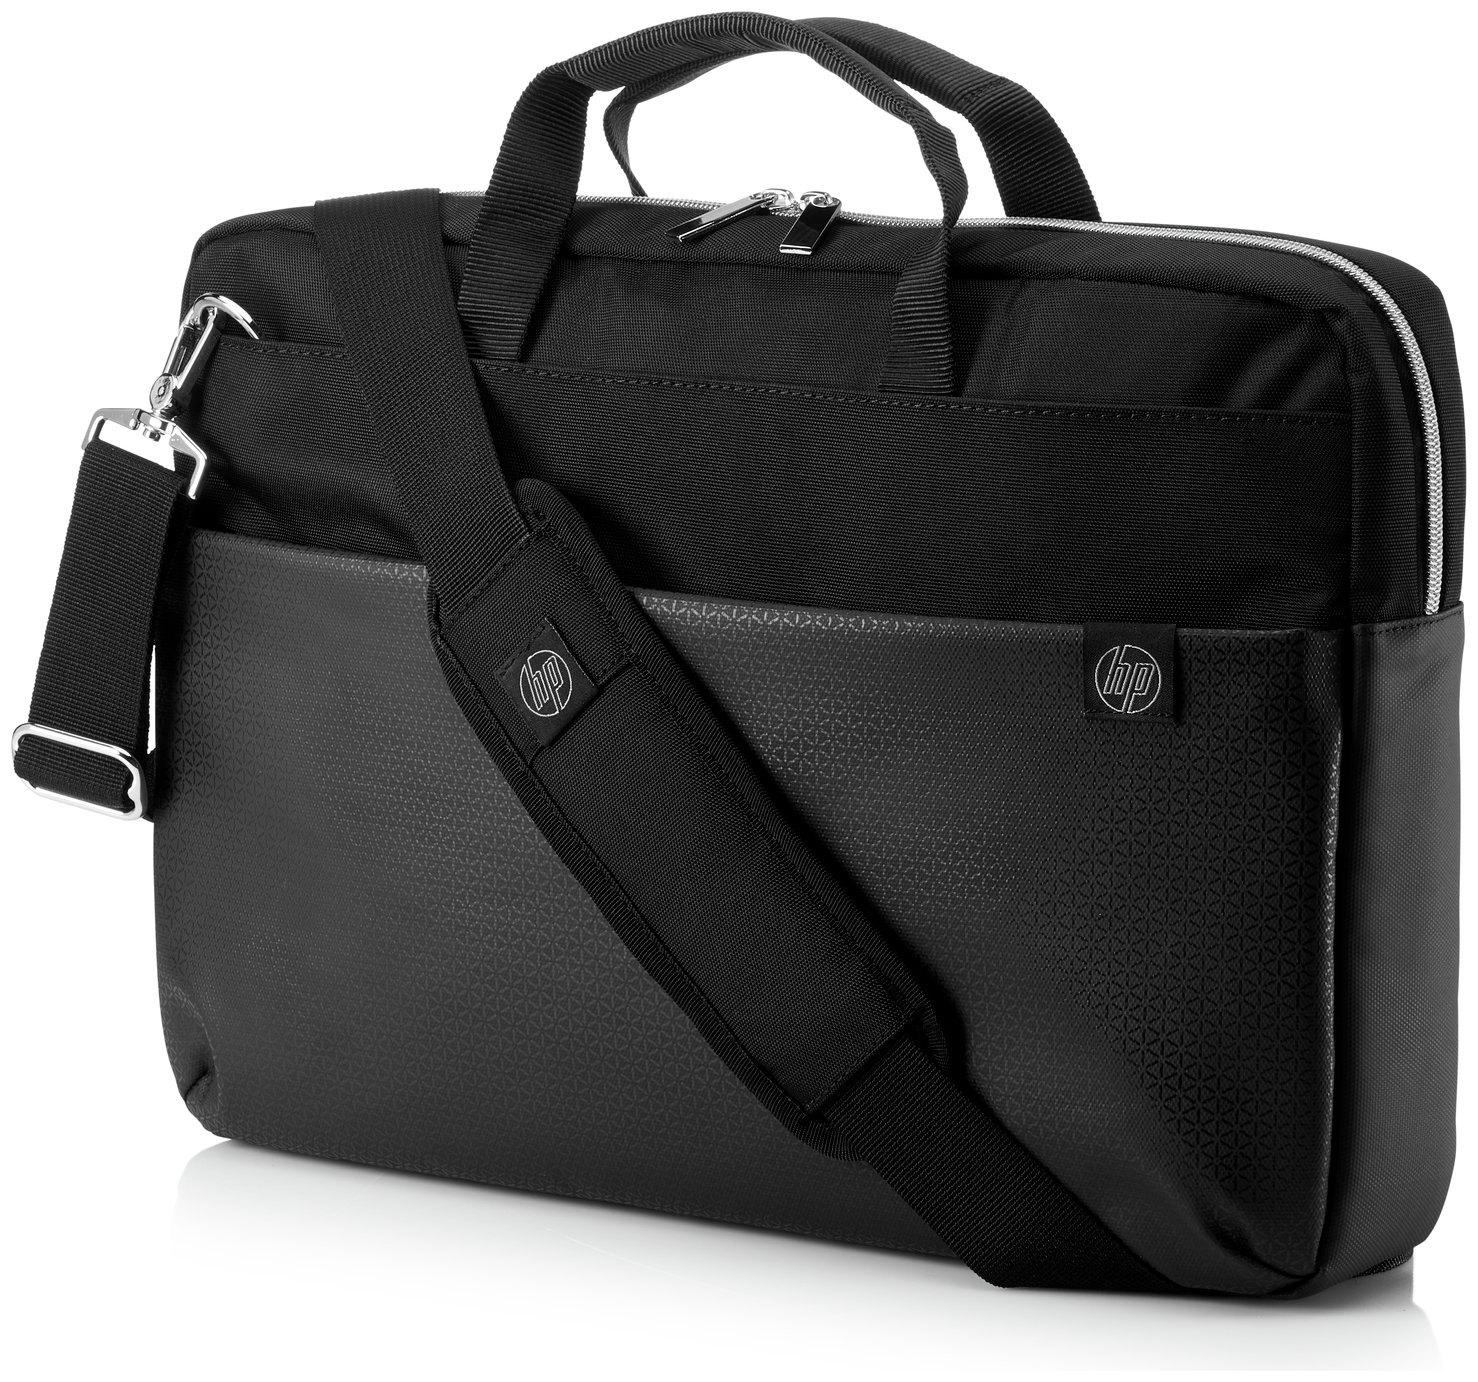 HP Duotone 15.6 Inch Laptop Briefcase Review